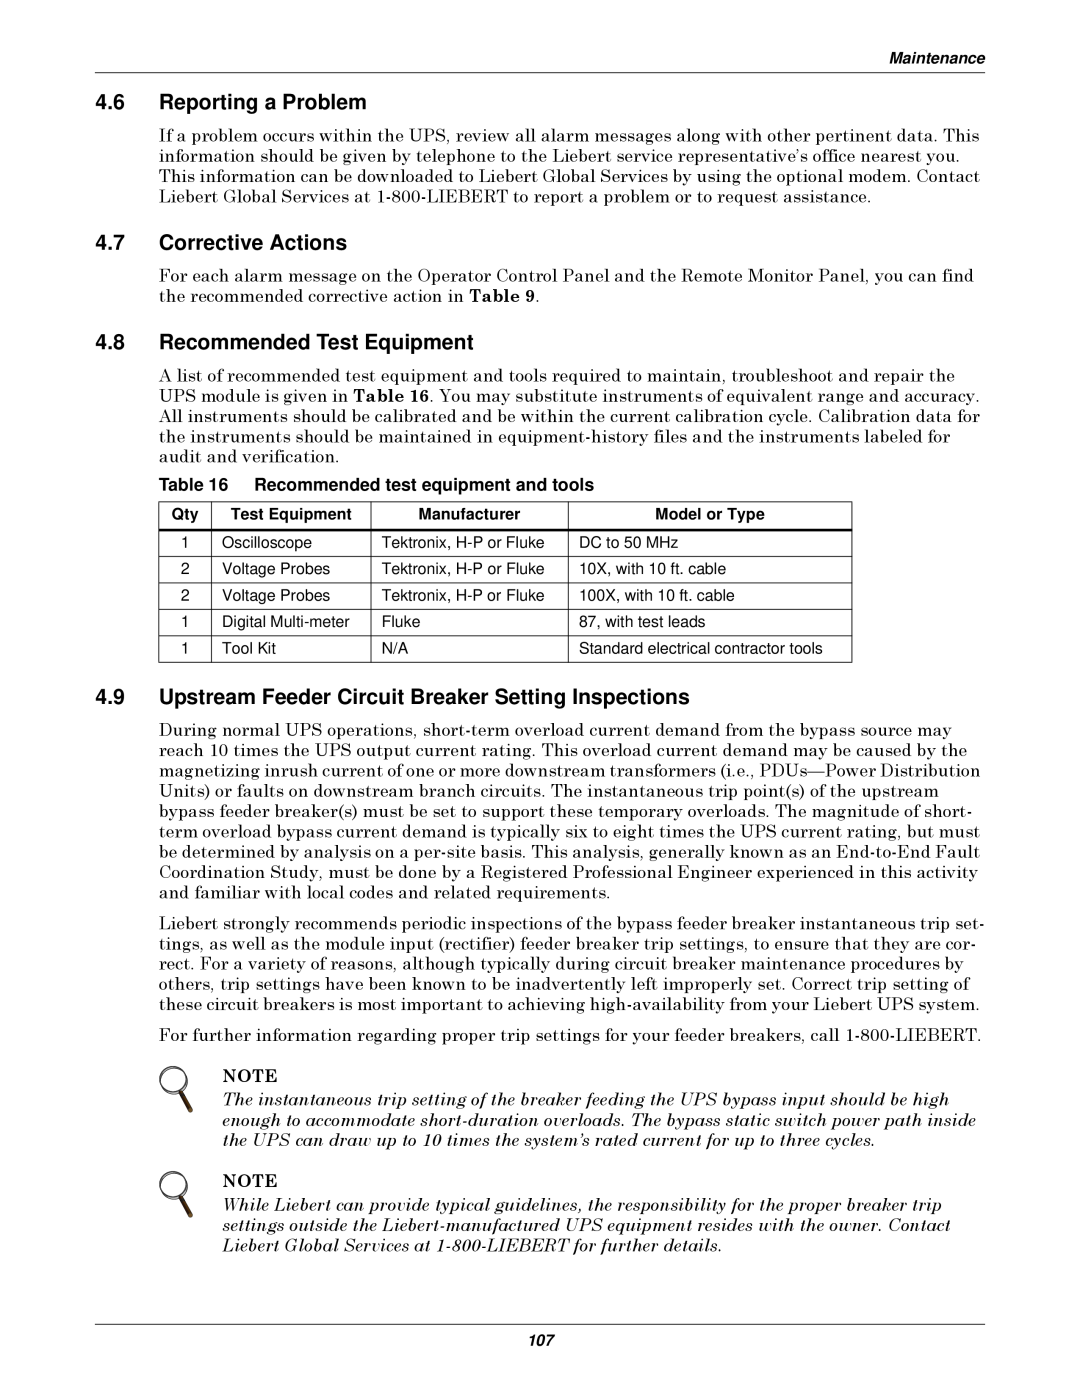 Emerson Series 610 manual Reporting a Problem, Corrective Actions, Recommended Test Equipment 